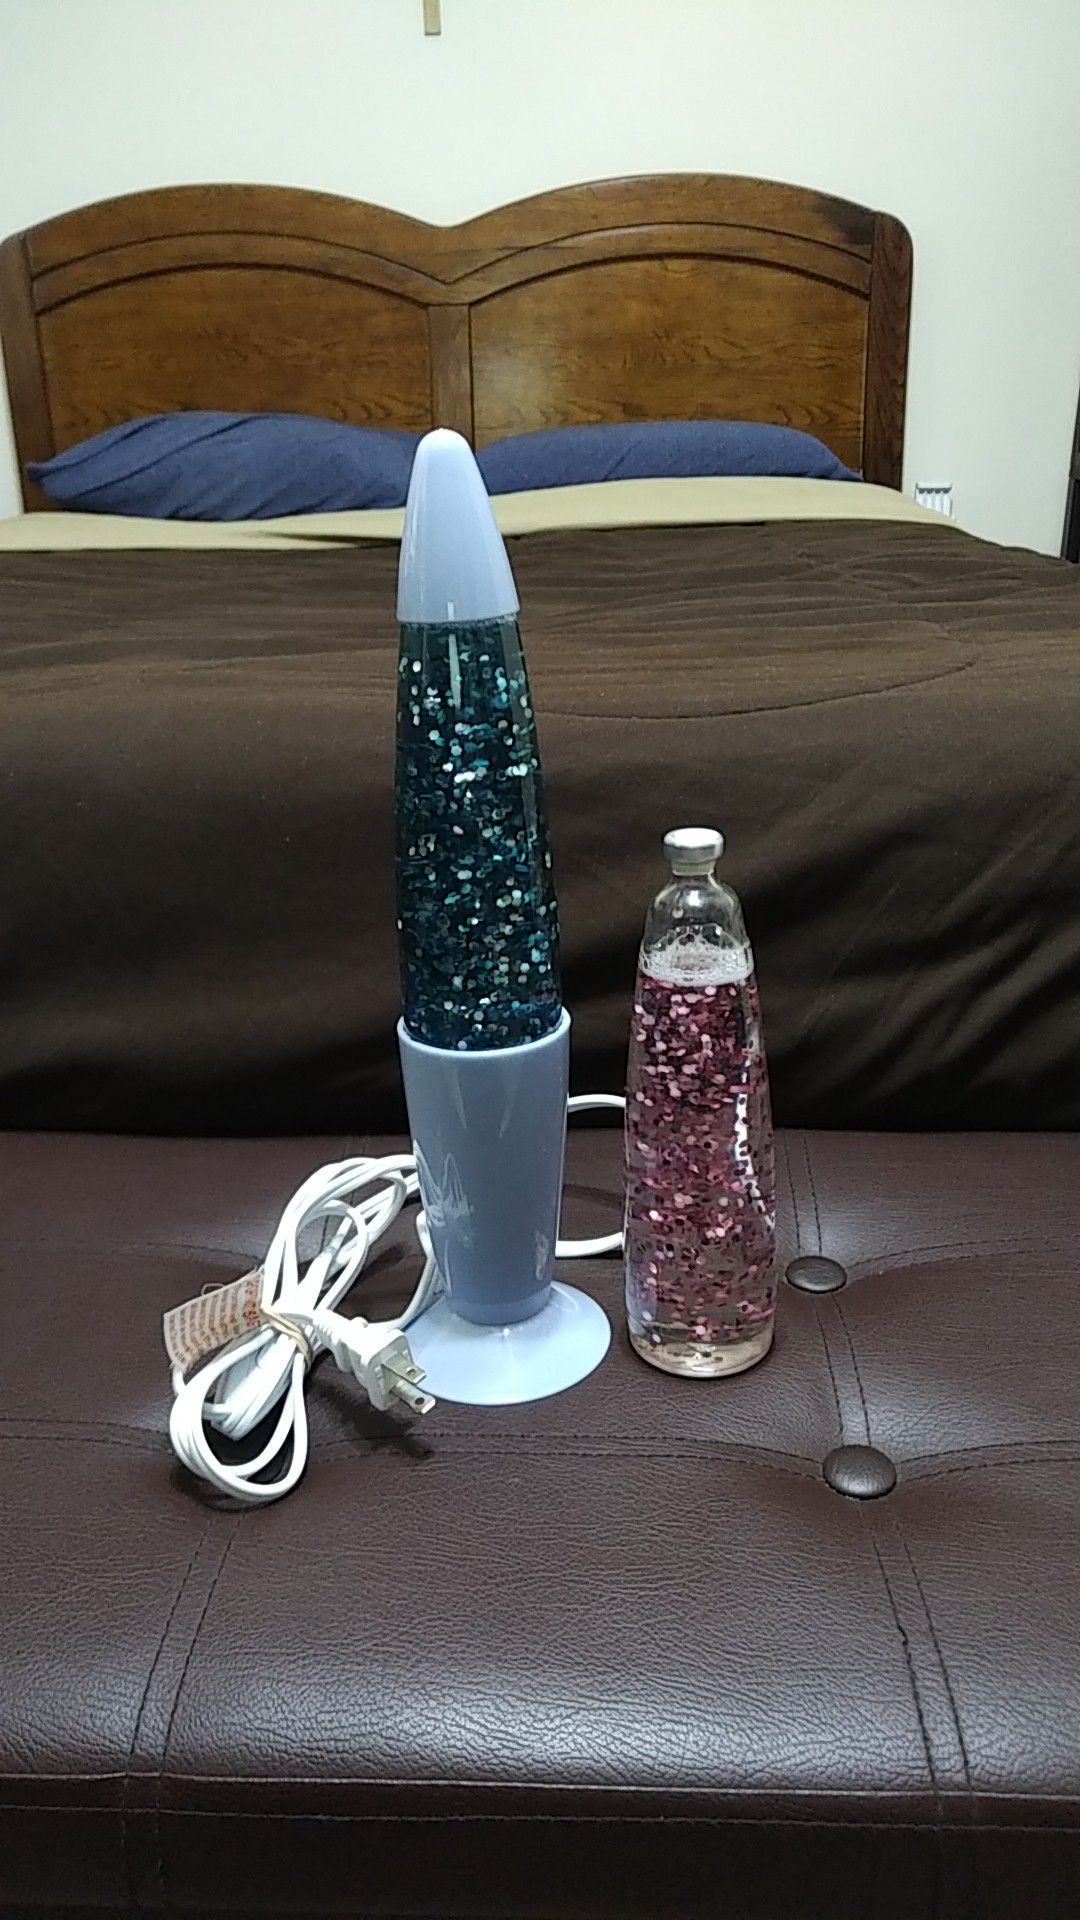 LOT OF 2 MOTION & GLITTER SHINE LAVA LAMPS ONE BASE AND CAP AND 2 BOTTLES ONE BLUE 1 RED SPARKLE